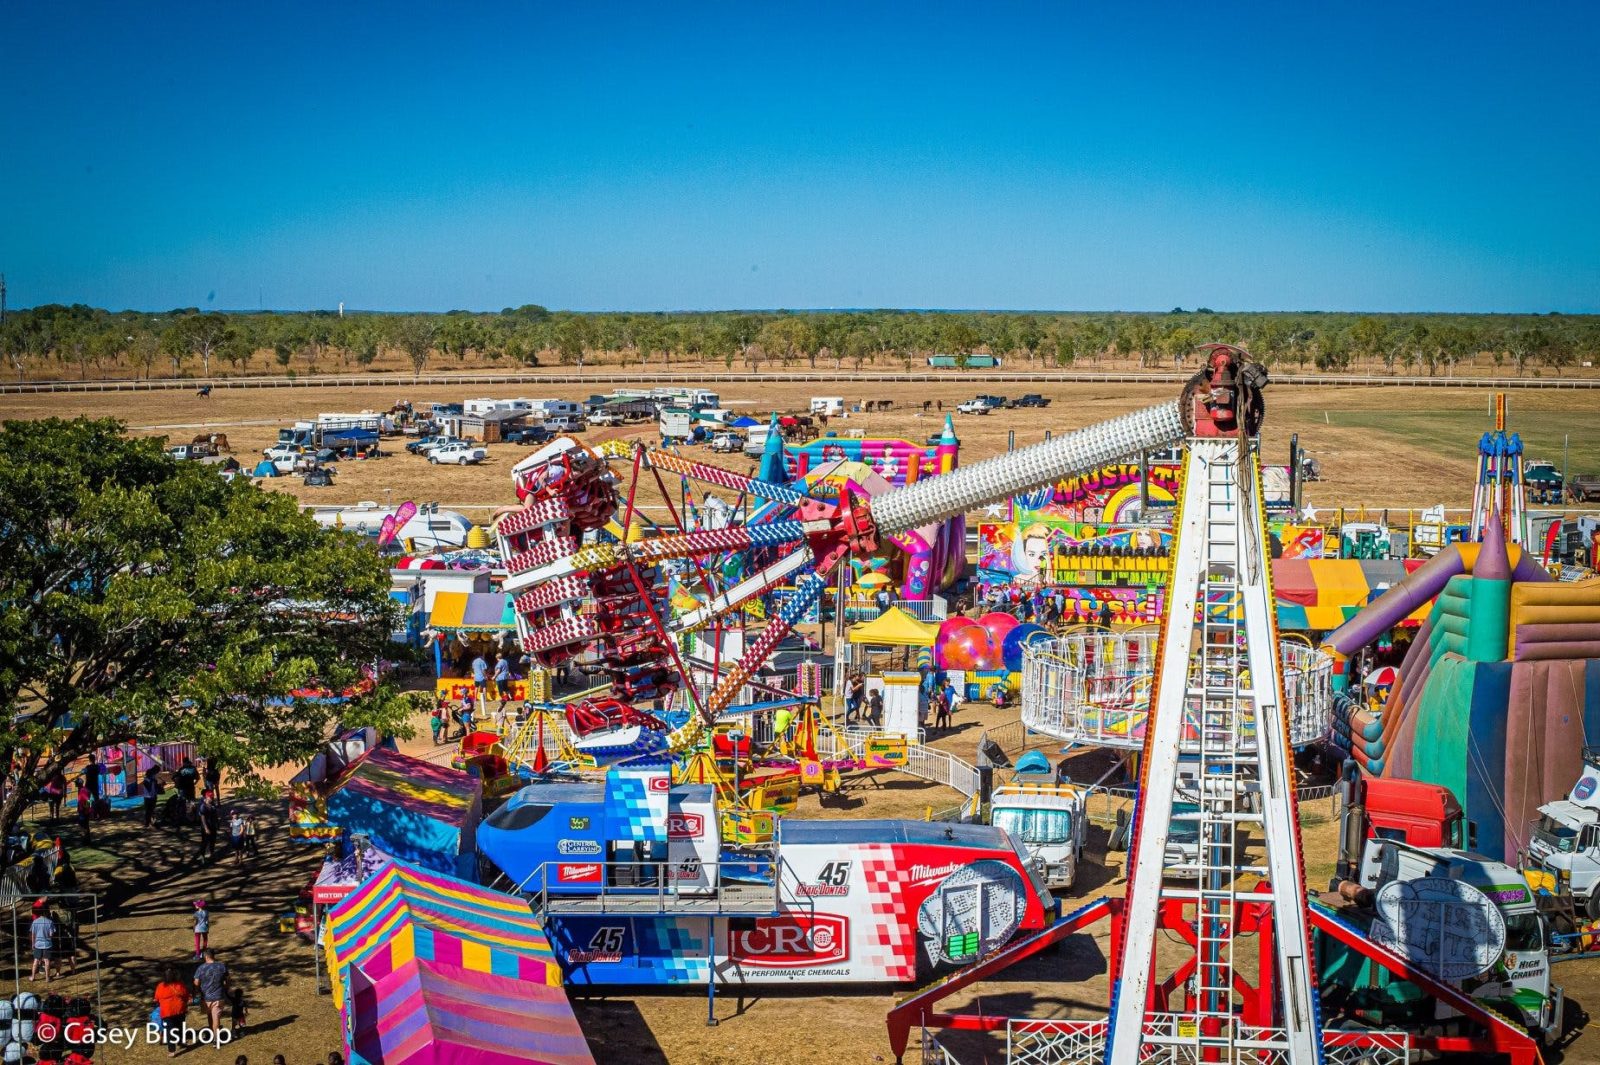 Photo of show amusement rides against backdrop of rodeo arena and rural landscape